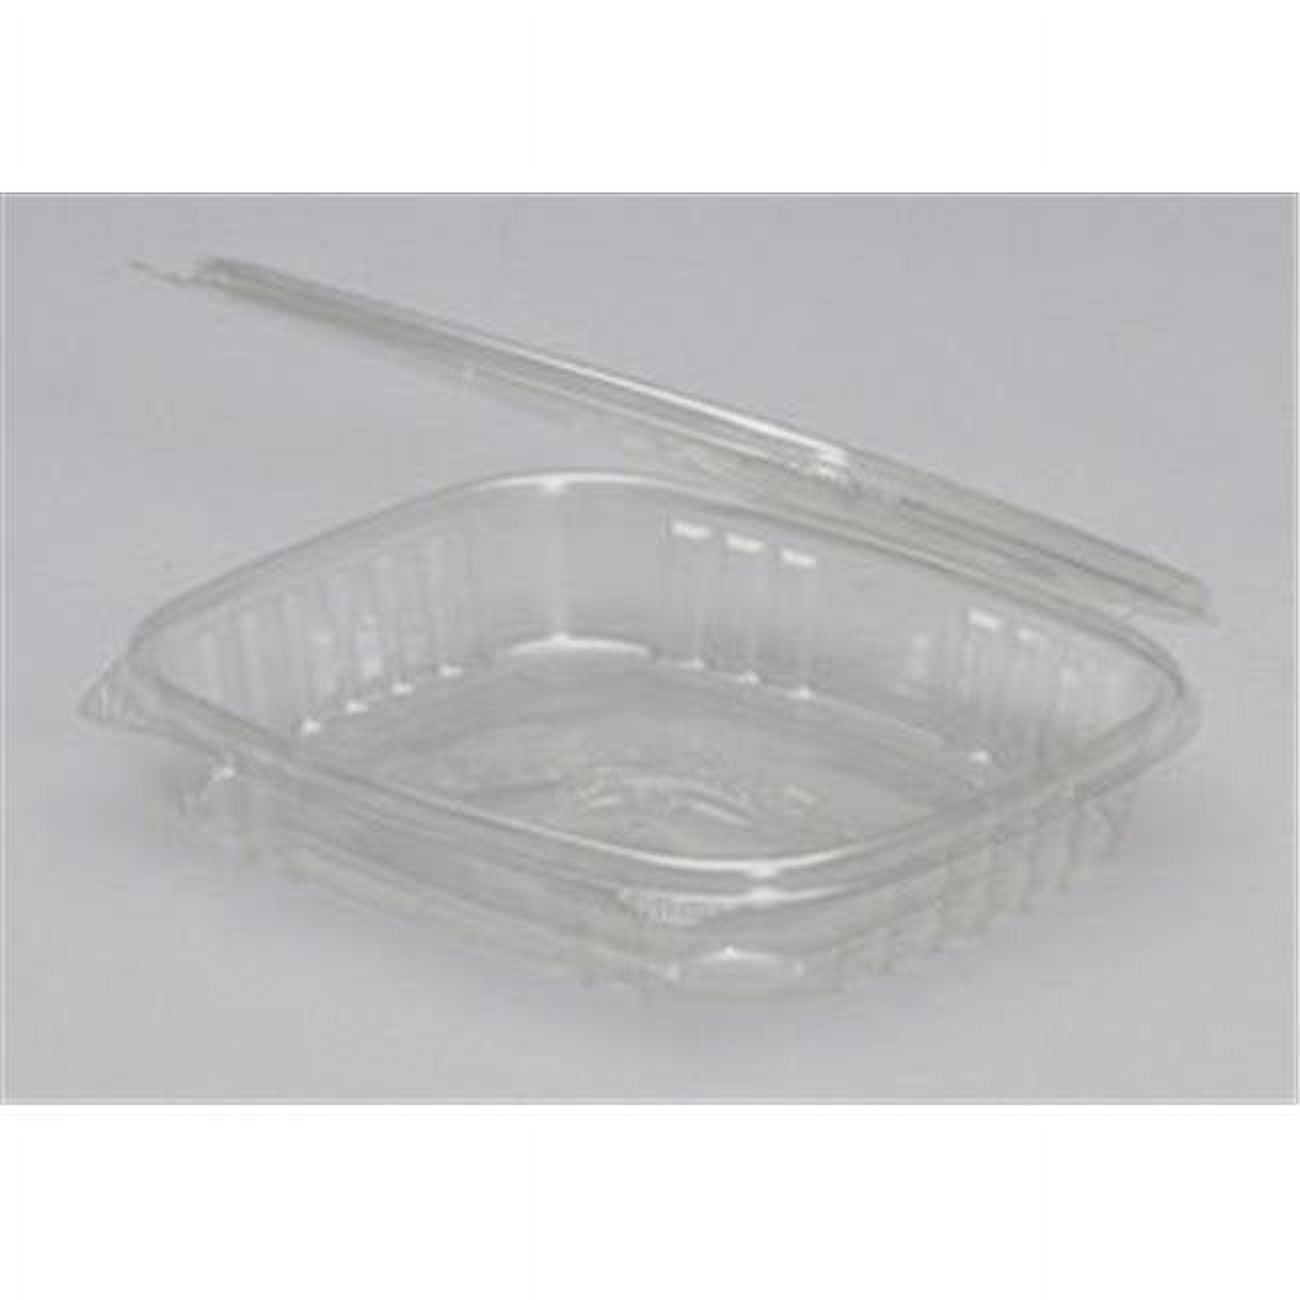 Ad16s Cpc 16 Oz Shallow Hinged Deli Container, Clear - Case Of 200